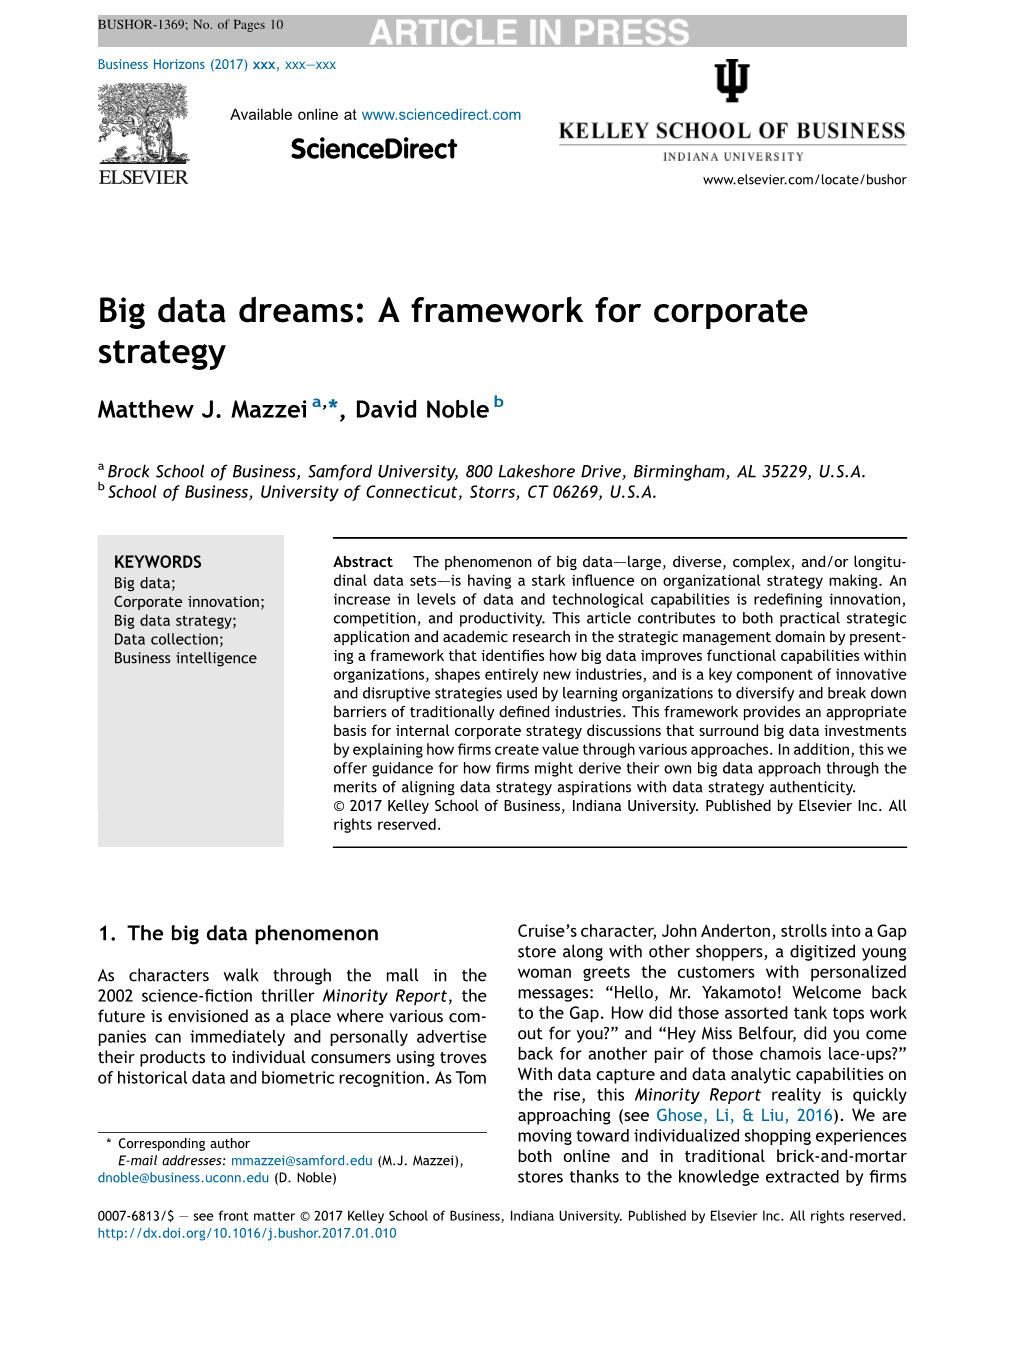 Big Data Dreams: a Framework for Corporate Strategy